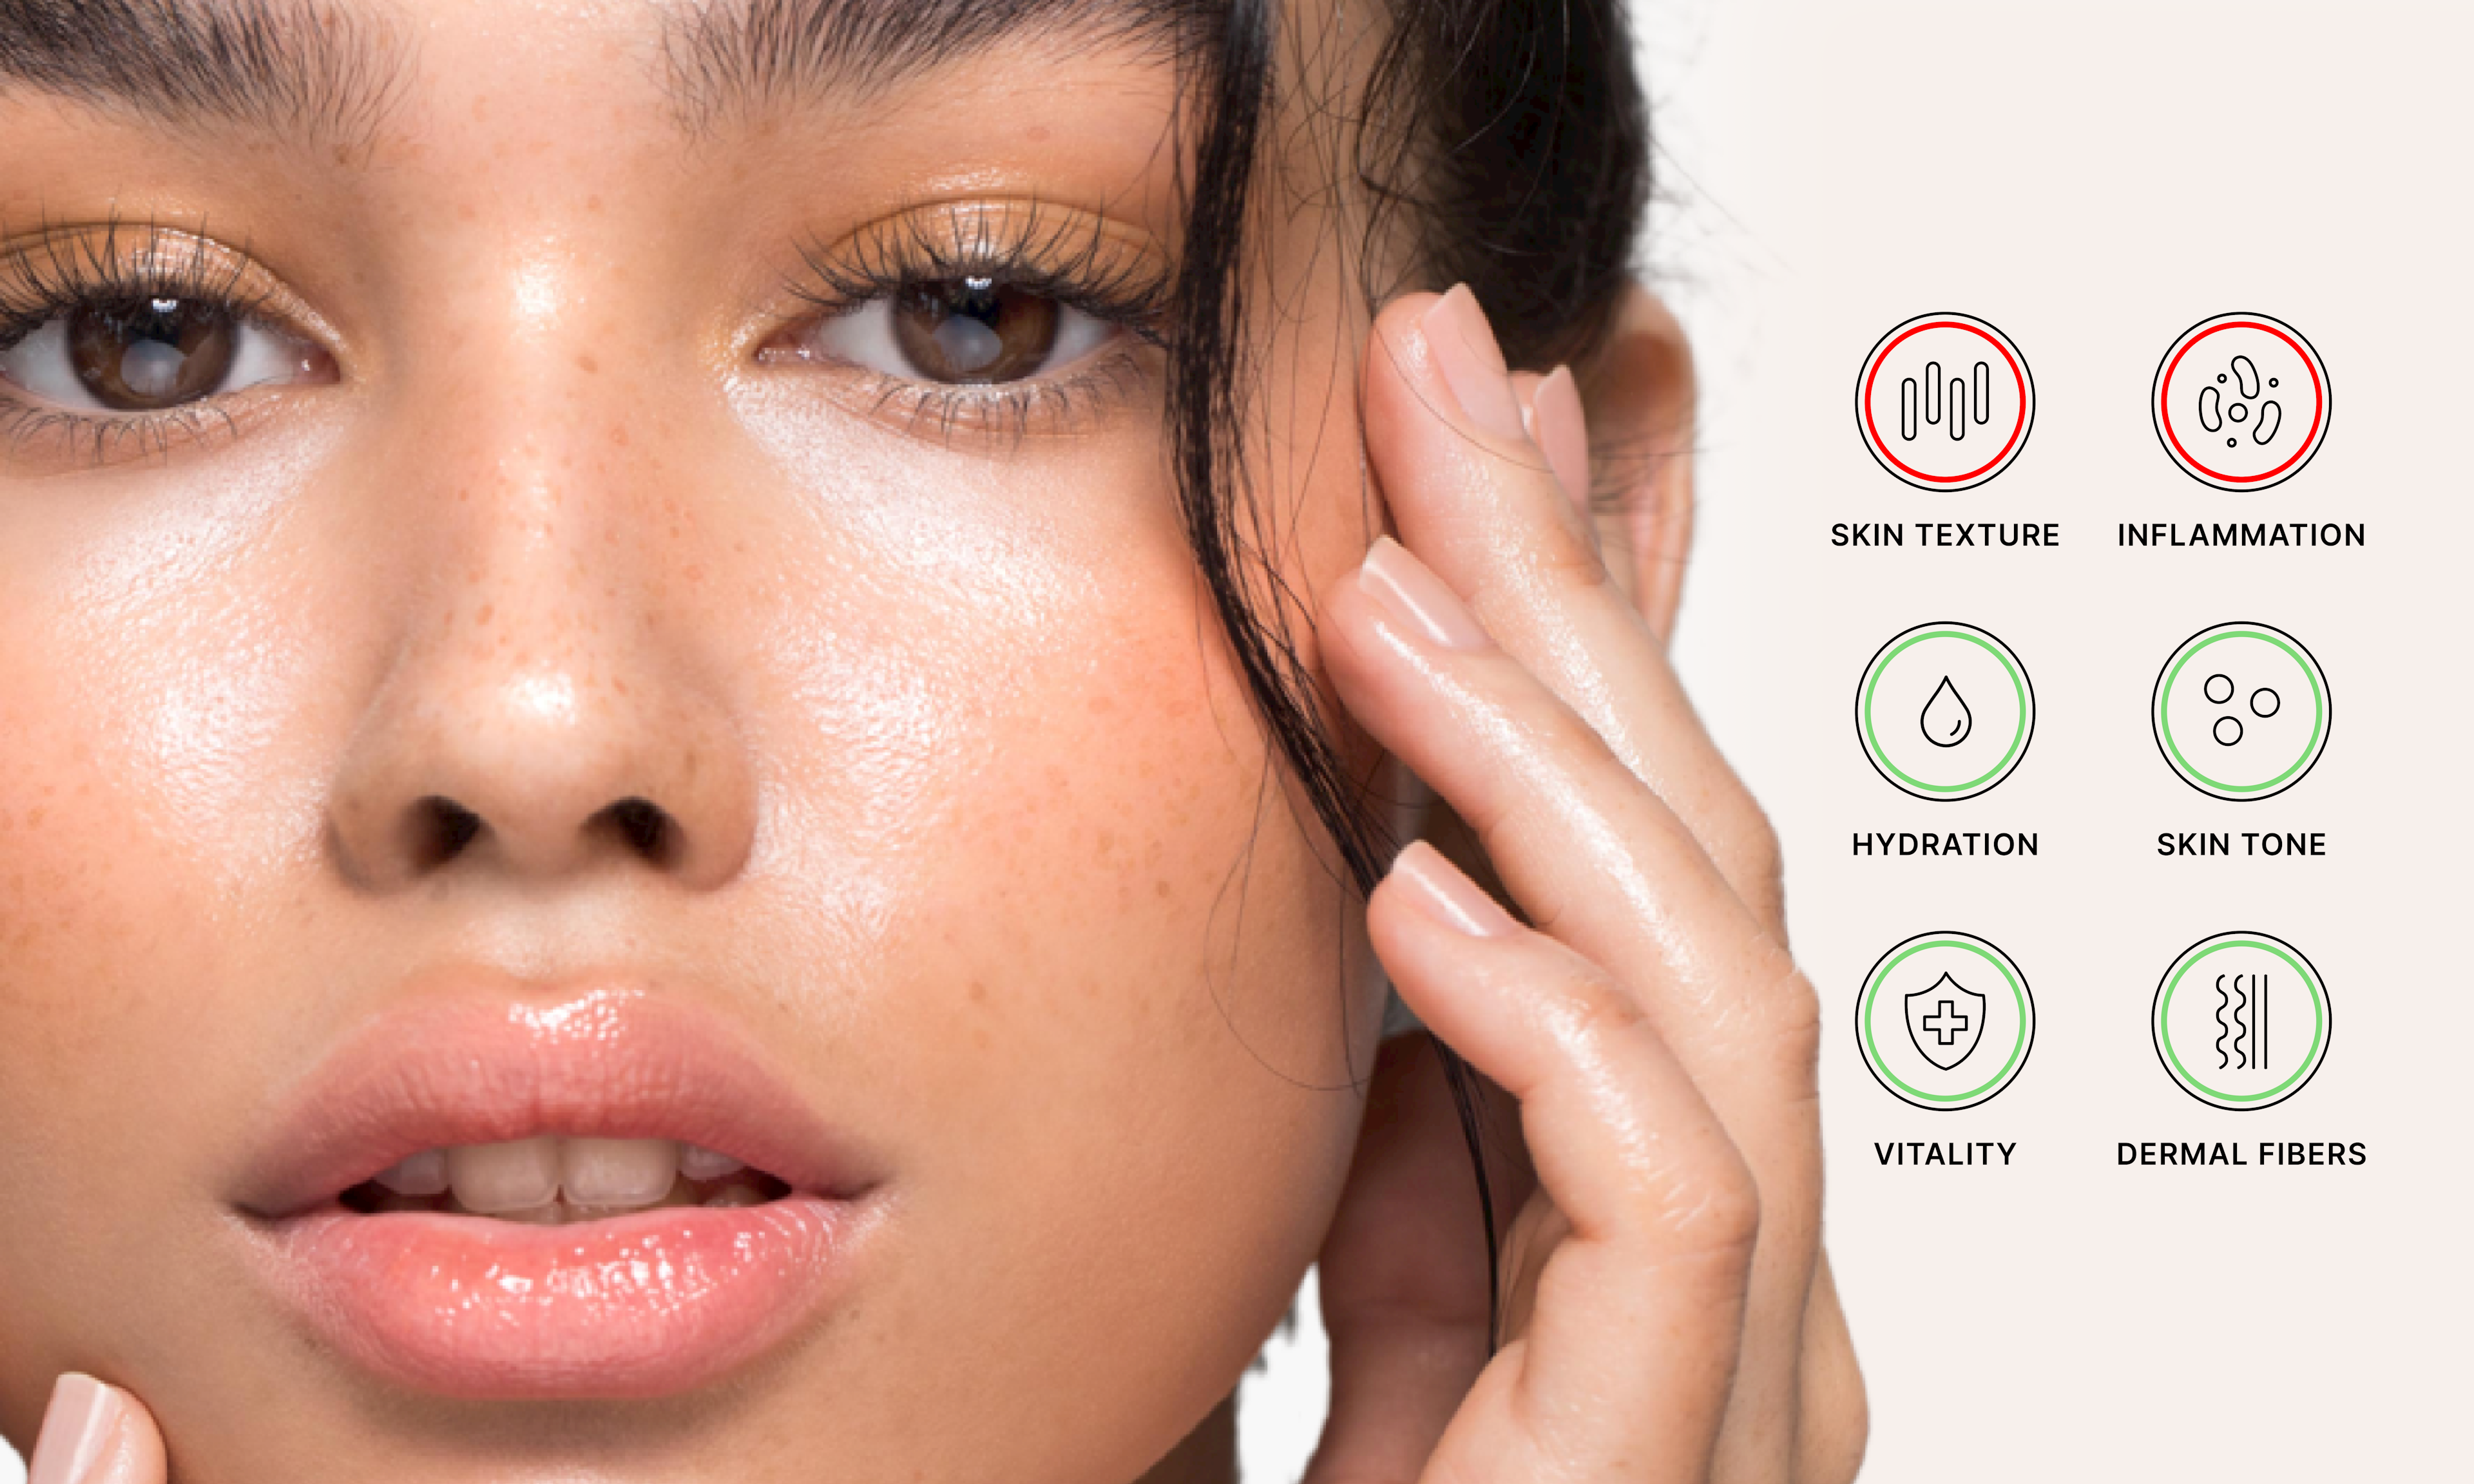 The 6 Parameters of Skin Radiance